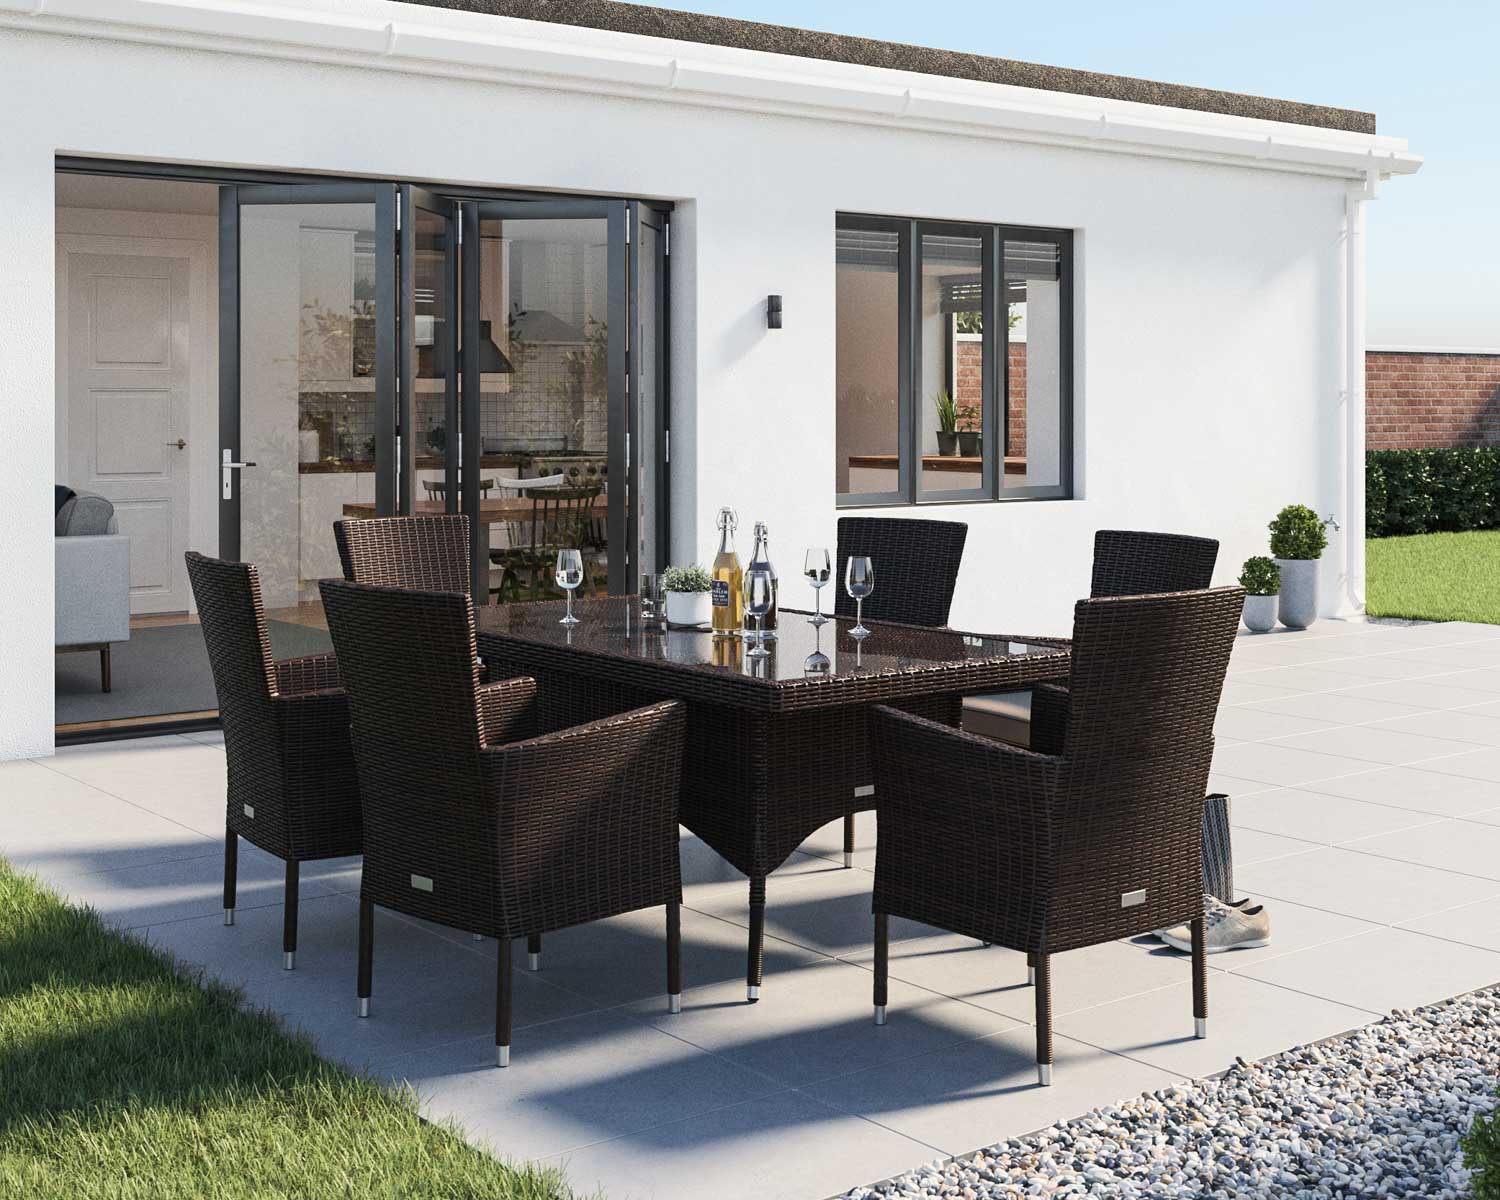 6 Seater Rattan Garden Dining Set With Small Rectangular Dining Table In Brown Cambridge Rattan Direct